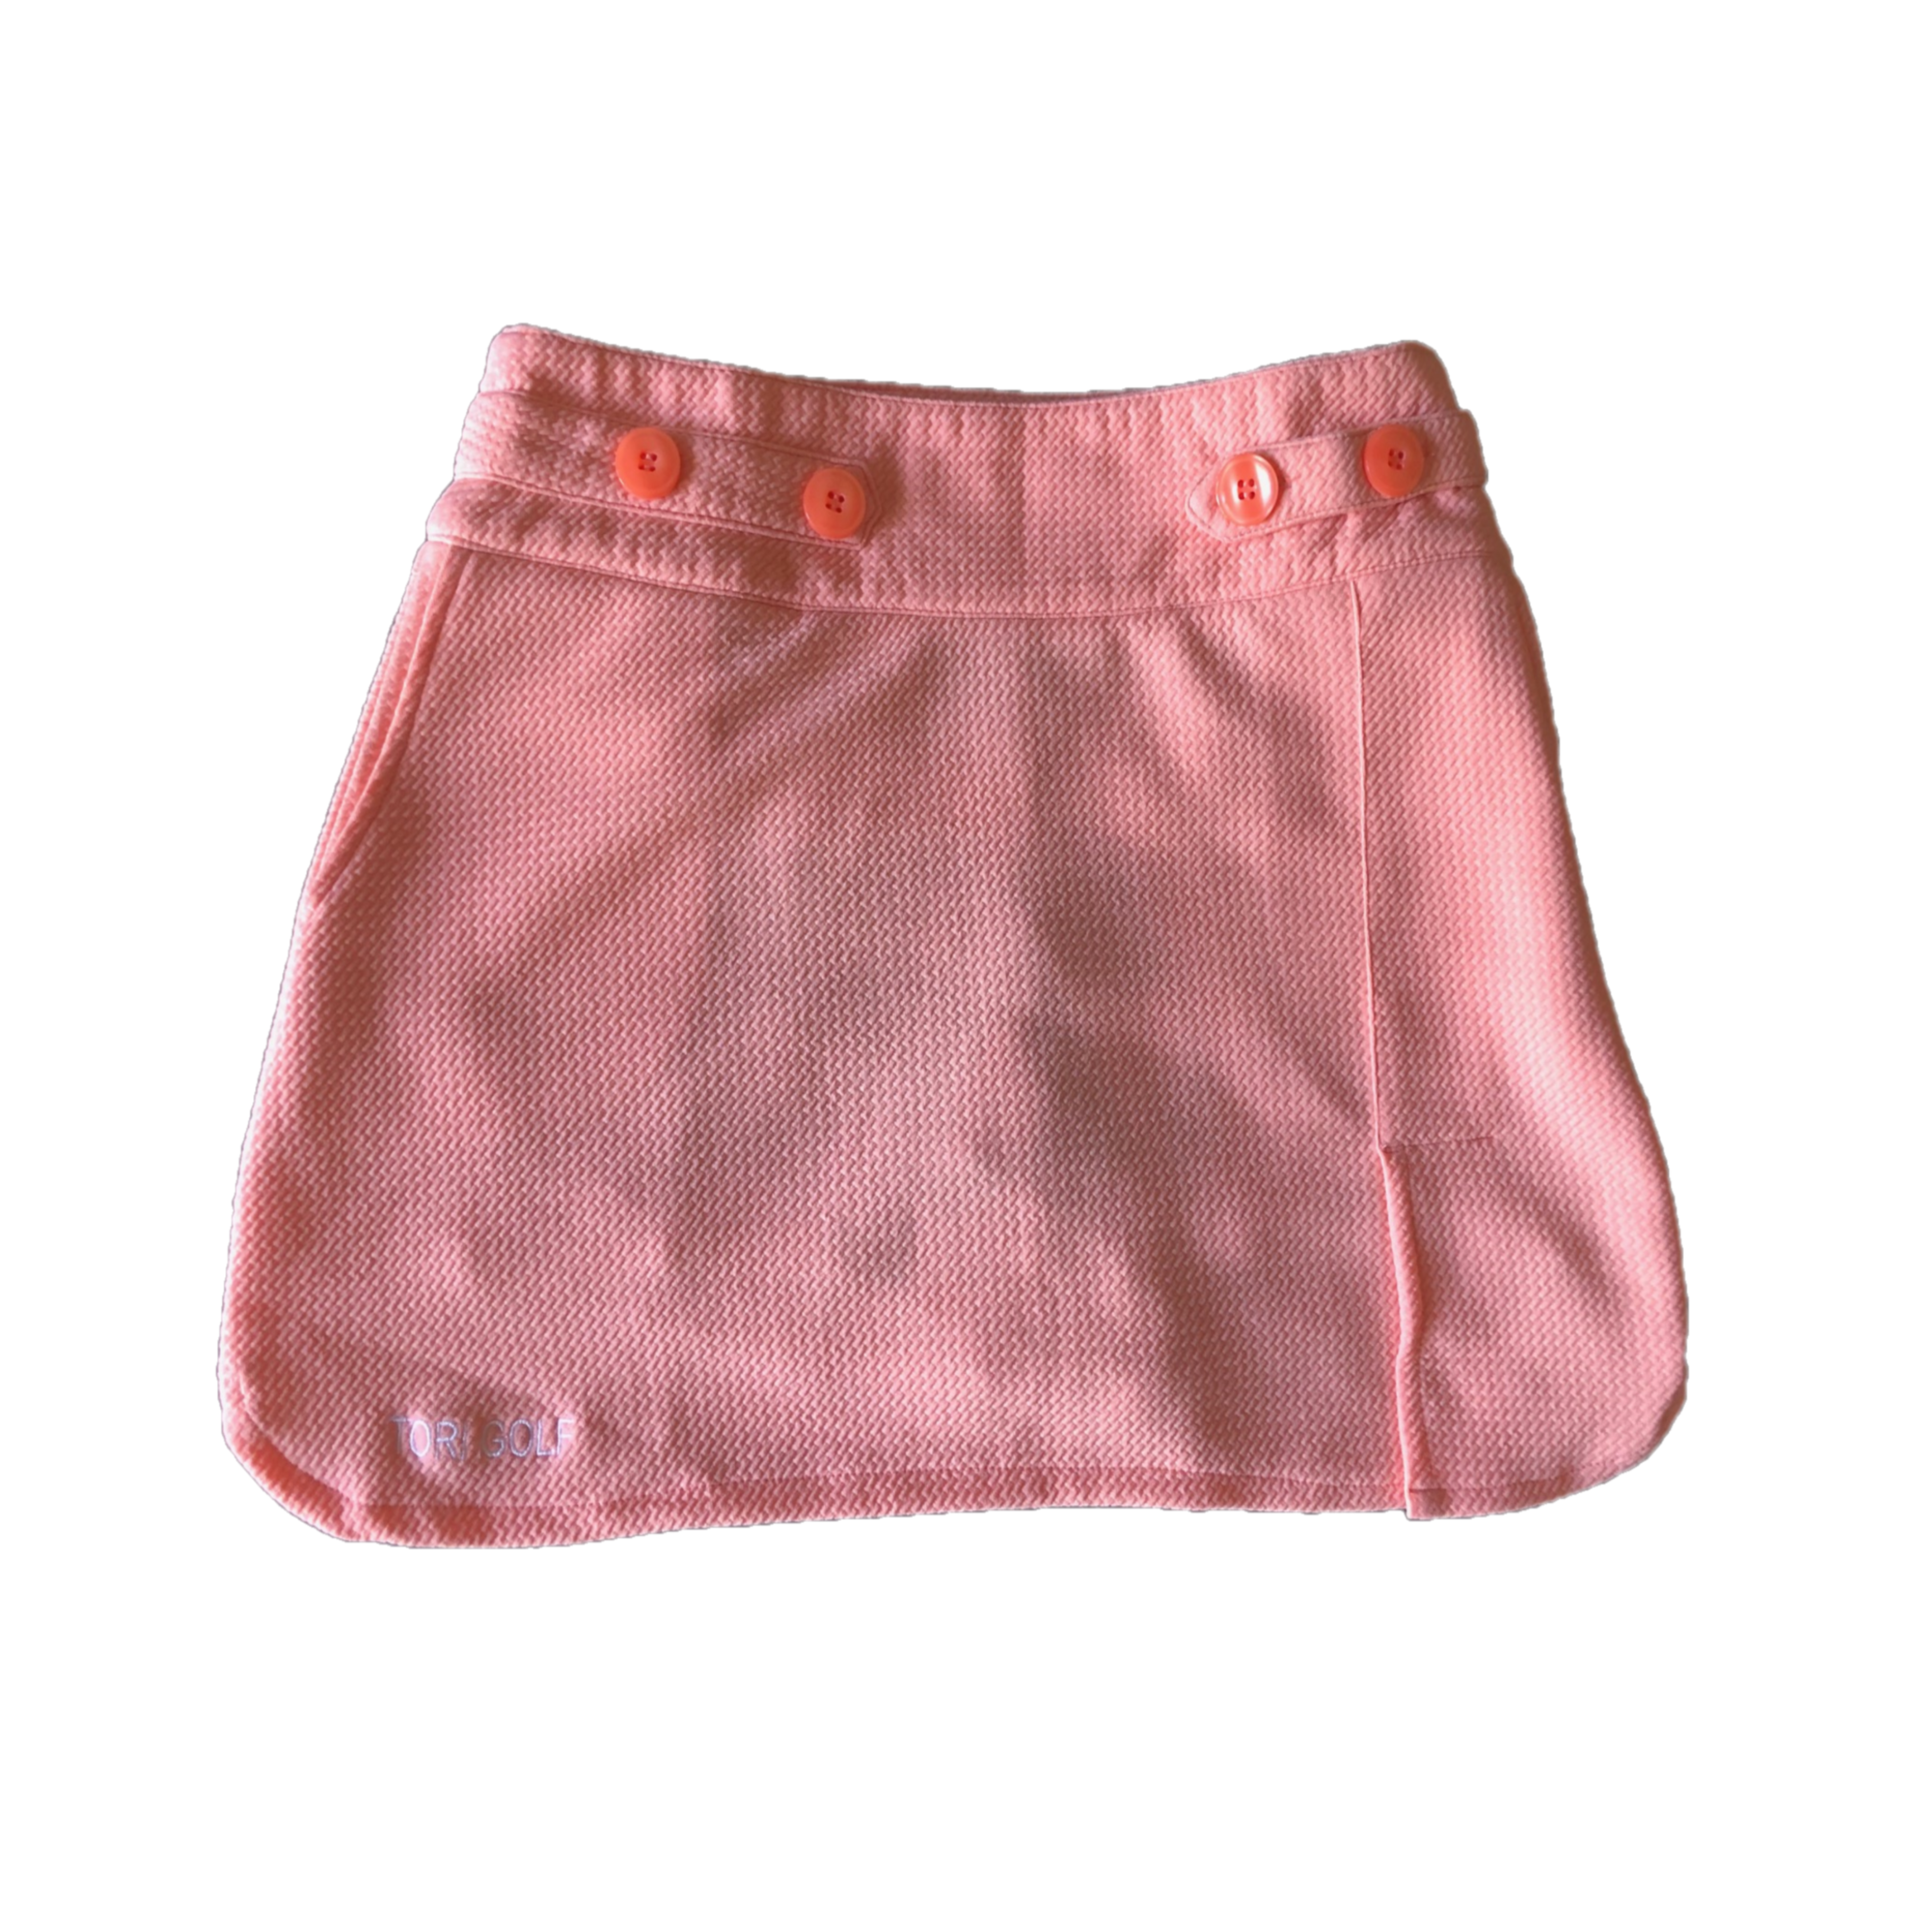 LS-070B  || Skirt Peach Pink Textured Fabric Side Zipper with 4 Large Waist Decorative Buttons 2 Side Pockets  and 2 Rear Button Flap Pockets.